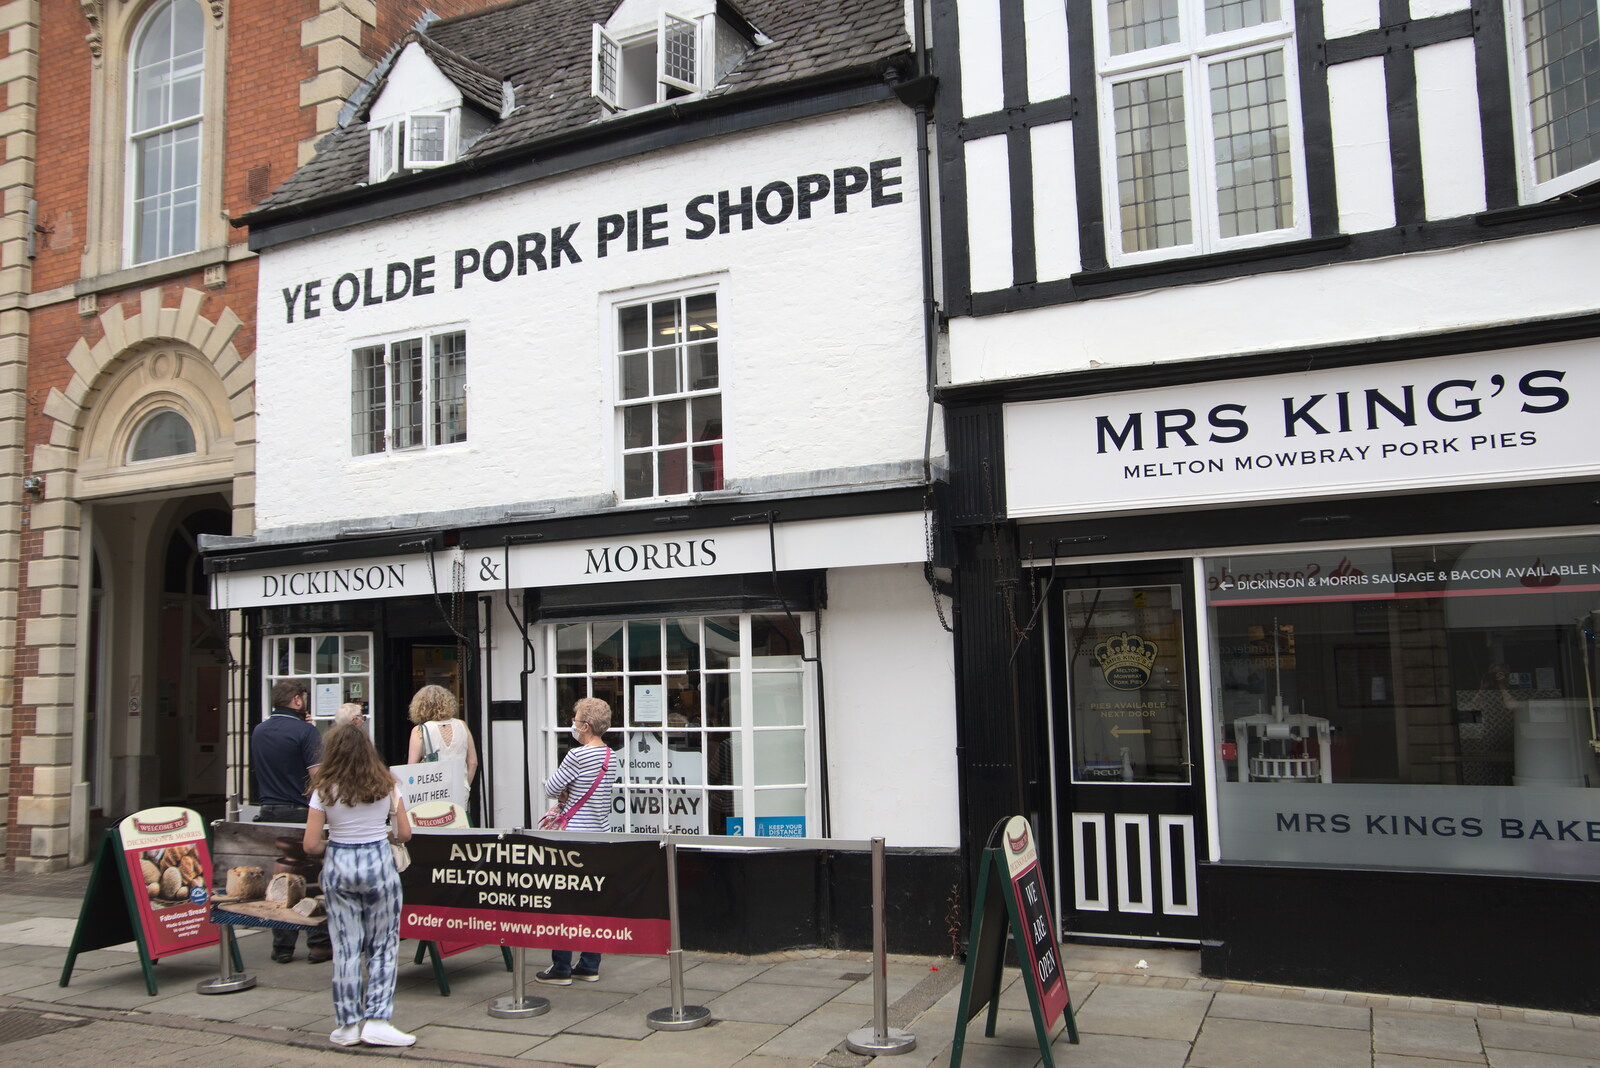 The Dickinson and Mrs King's pork pie shop from Pork Pies and Dockside Dereliction, Melton Mowbray and Liverpool - 7th August 2021